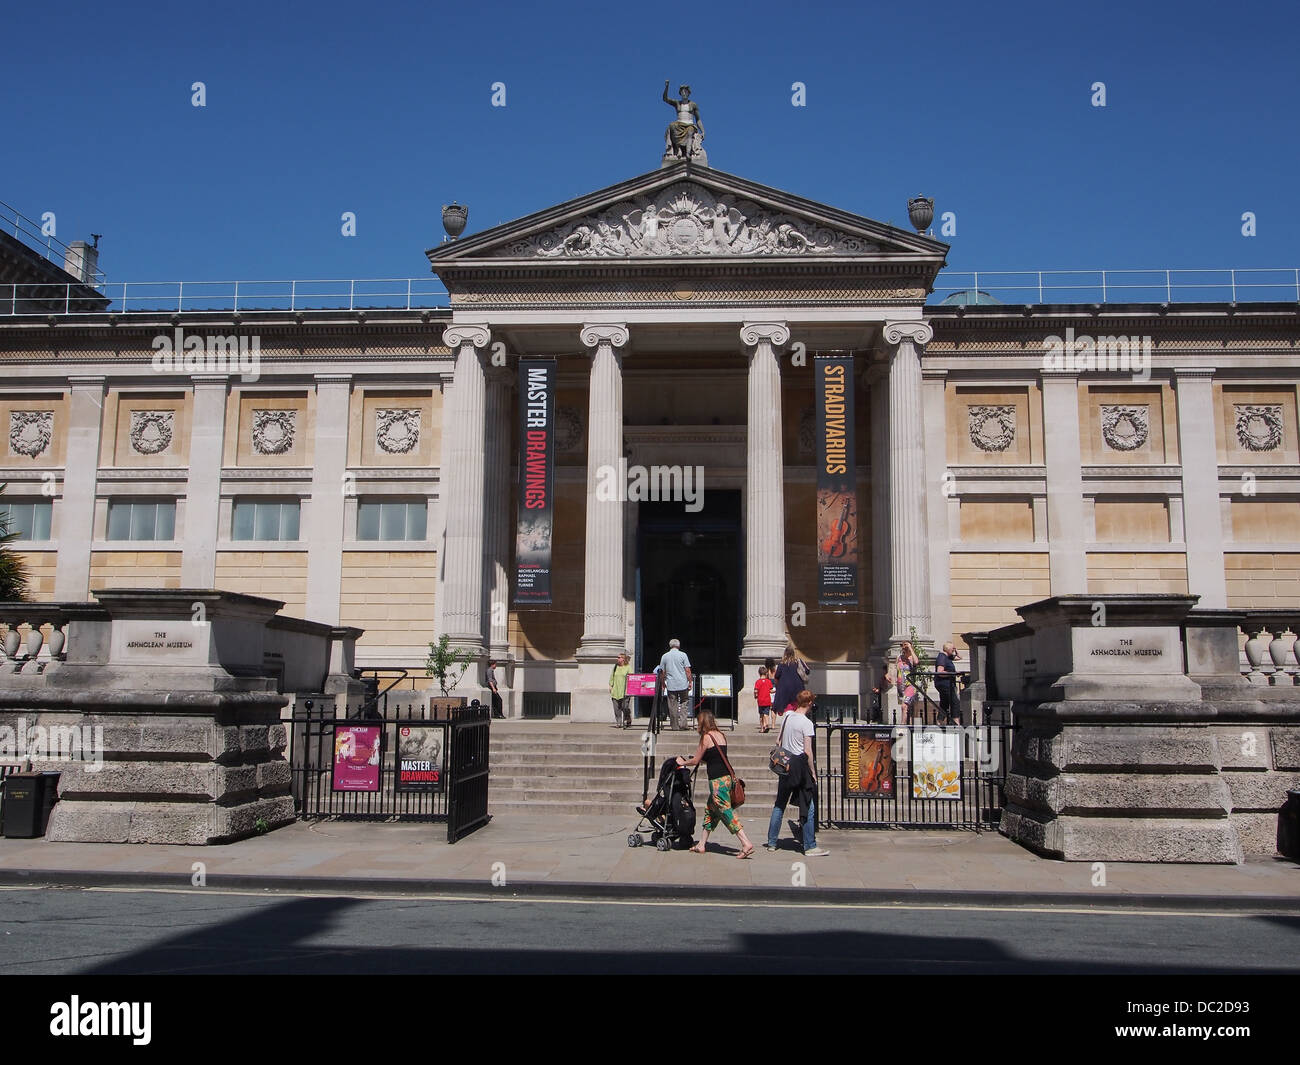 Ashmolean Museum, Oxford, Angleterre Banque D'Images